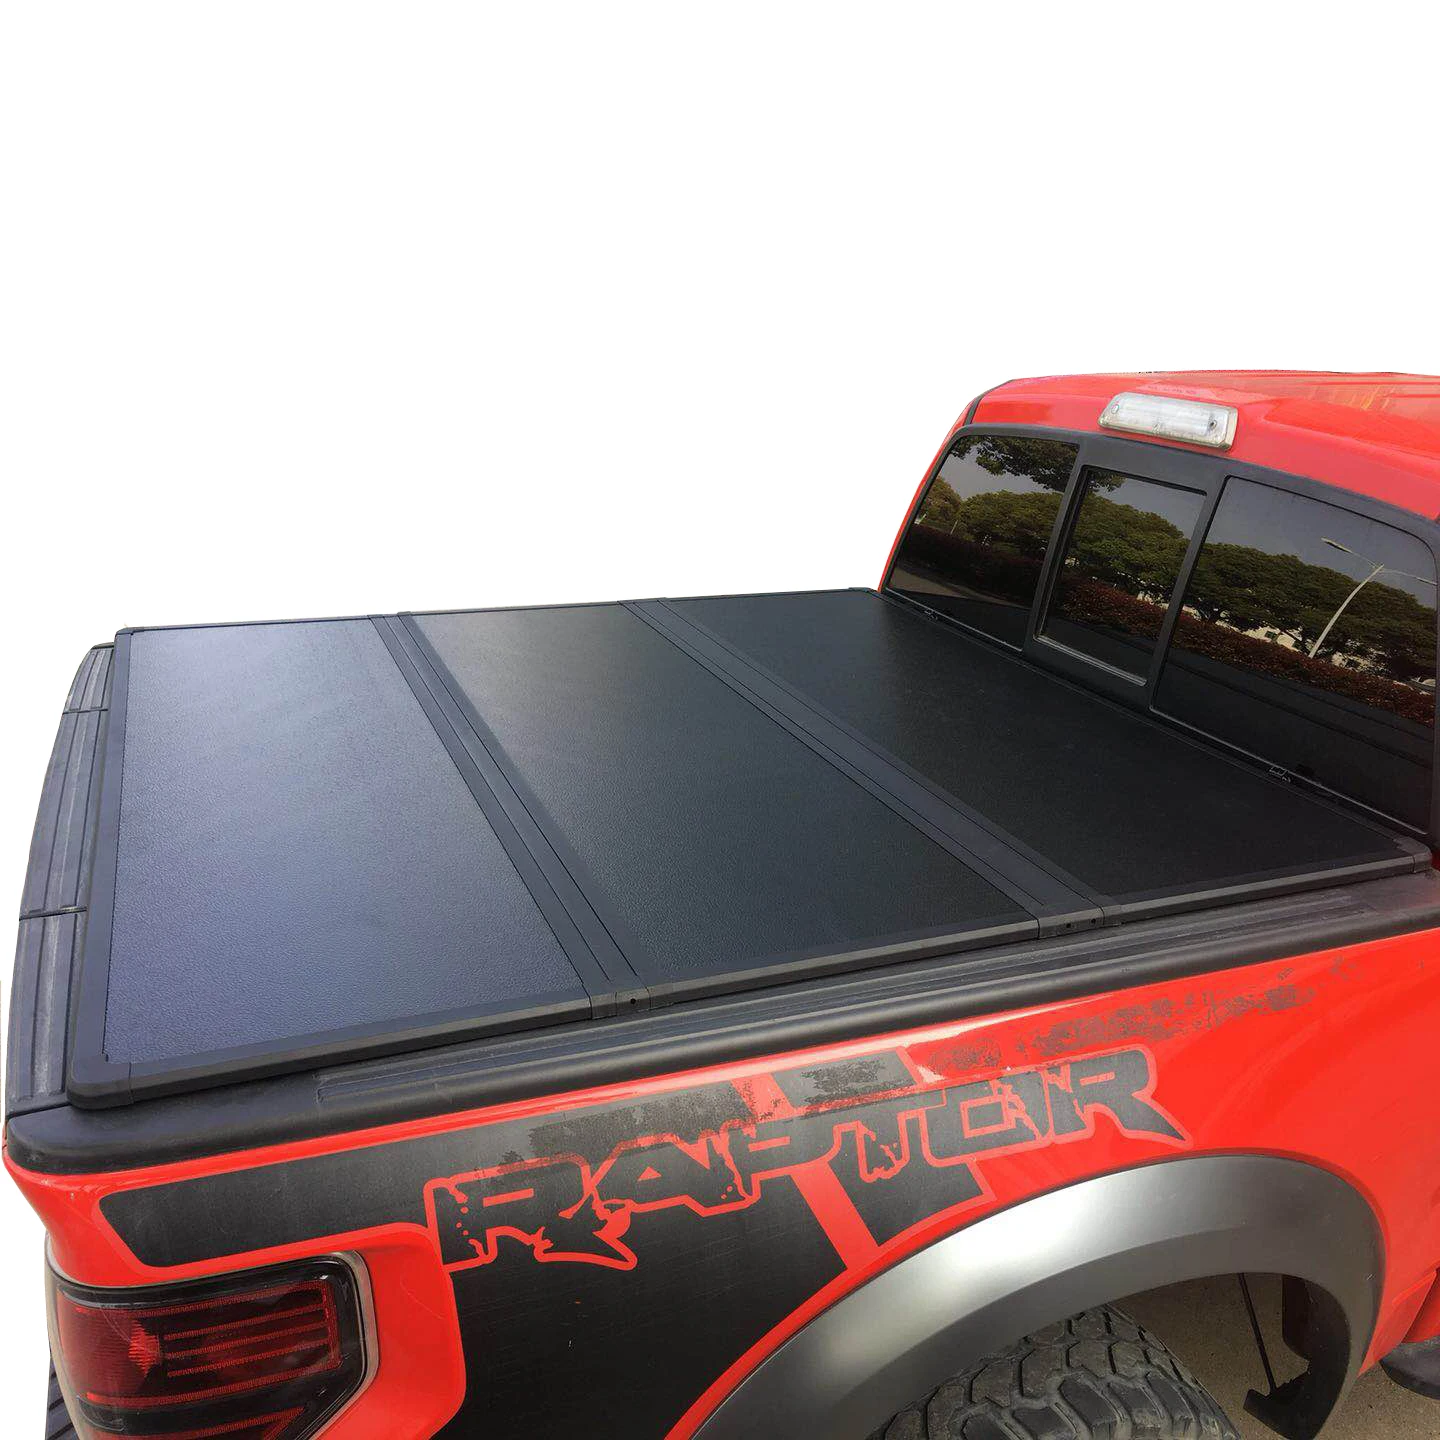 
Aluminum Hard Tri Folding Tonneau Cover Bed Cover For Truck Accessories  (62307451253)